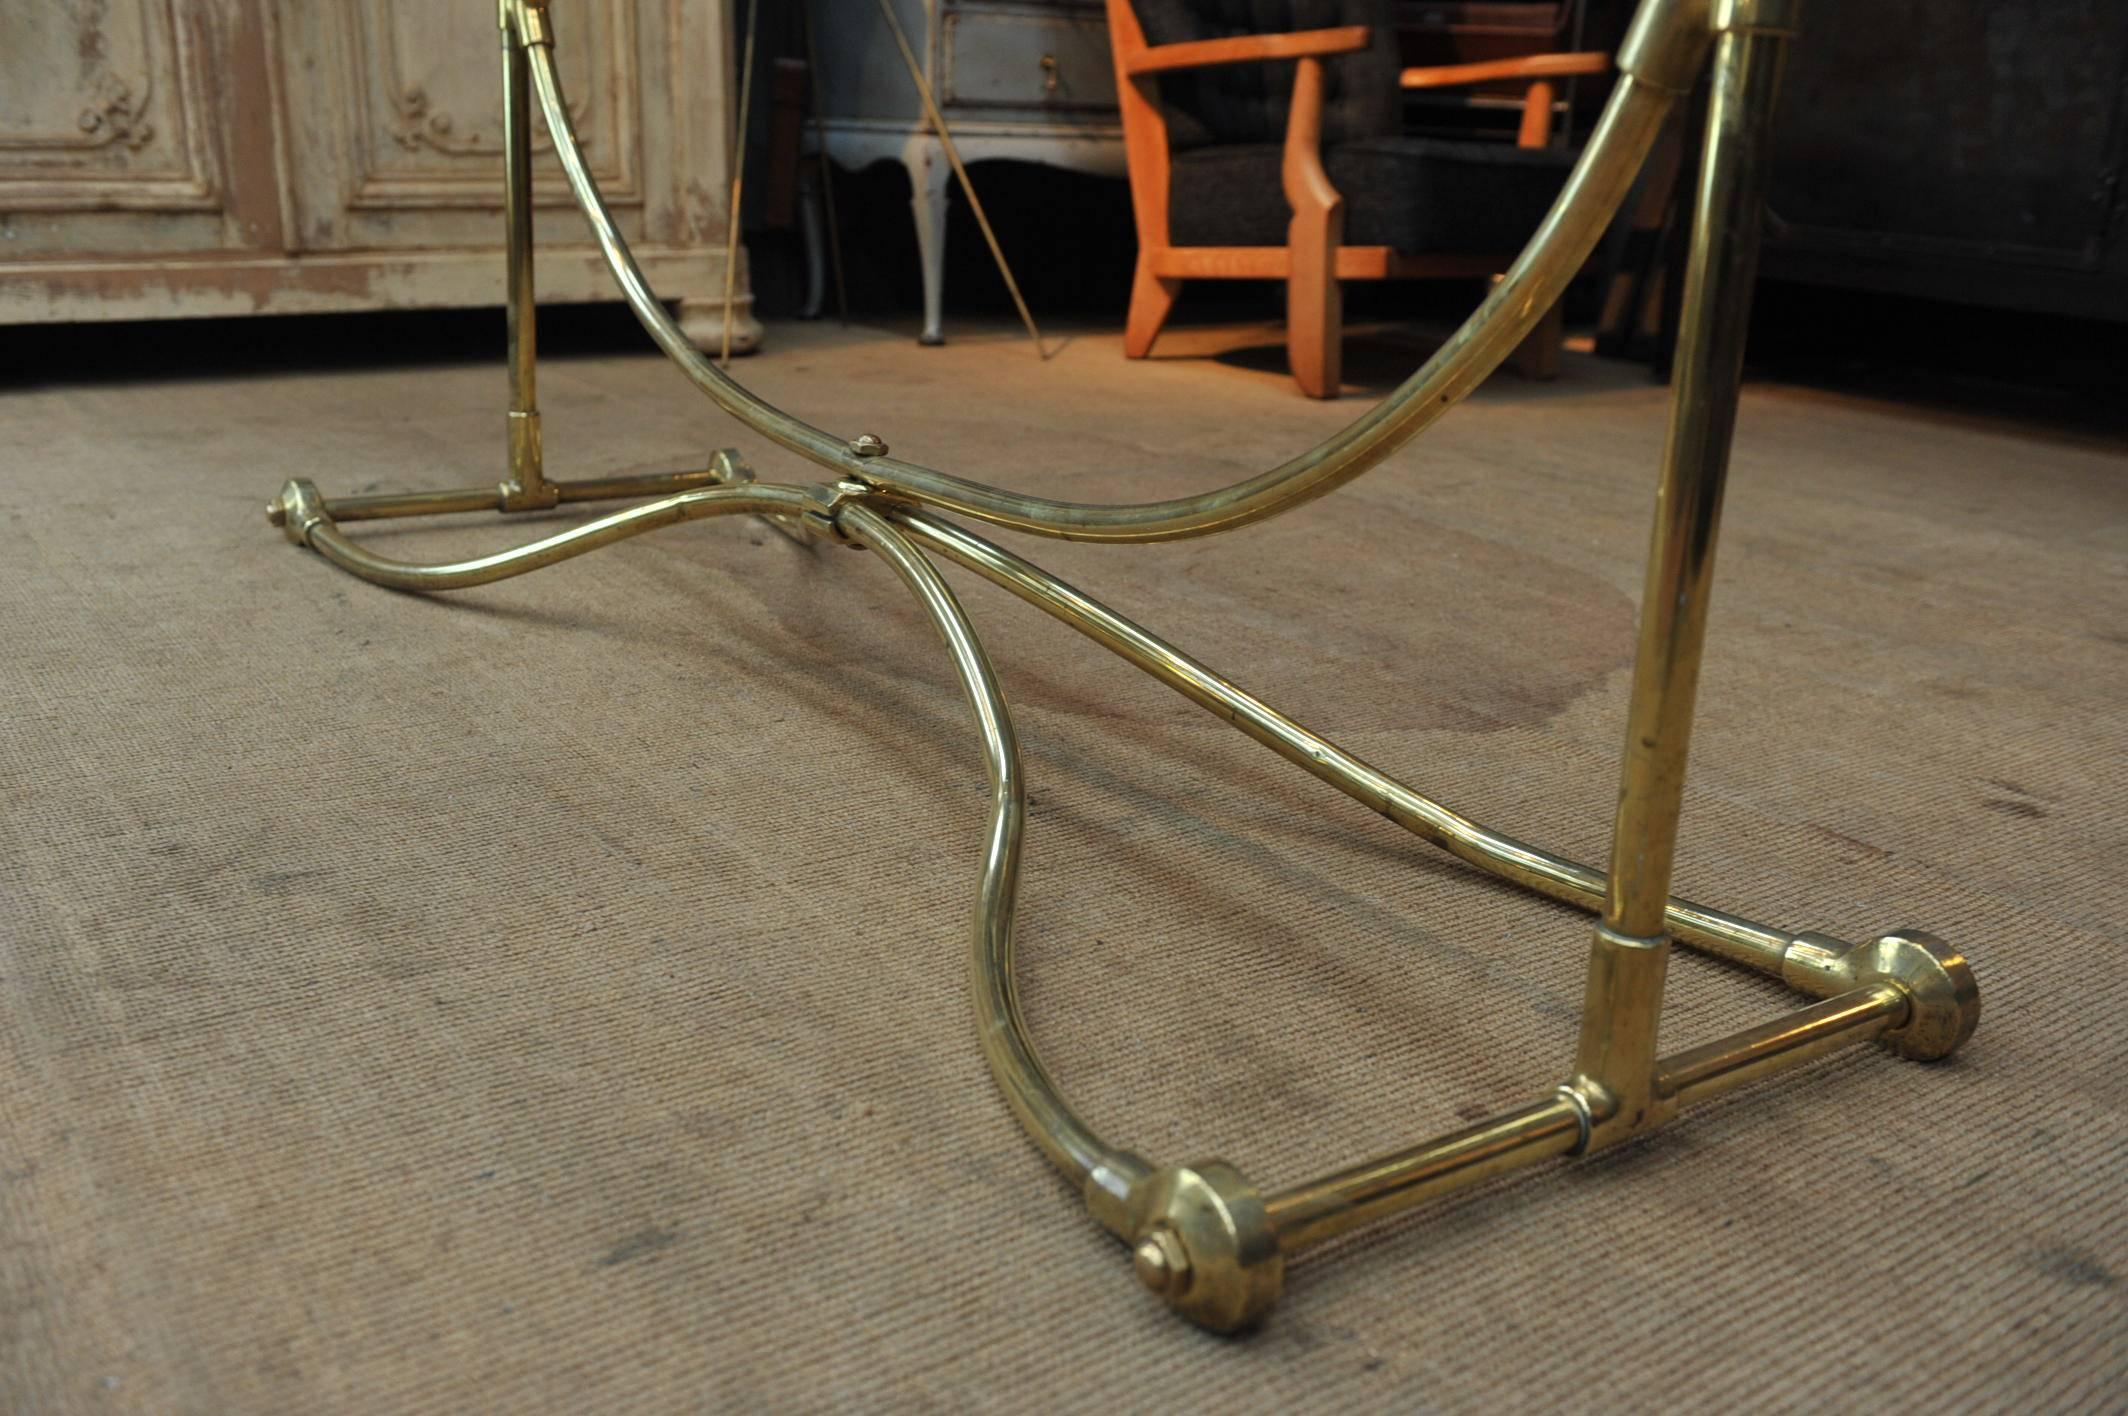 Very fine French shop brass clothes rack or coat hanger. Central bar adjustable in height.